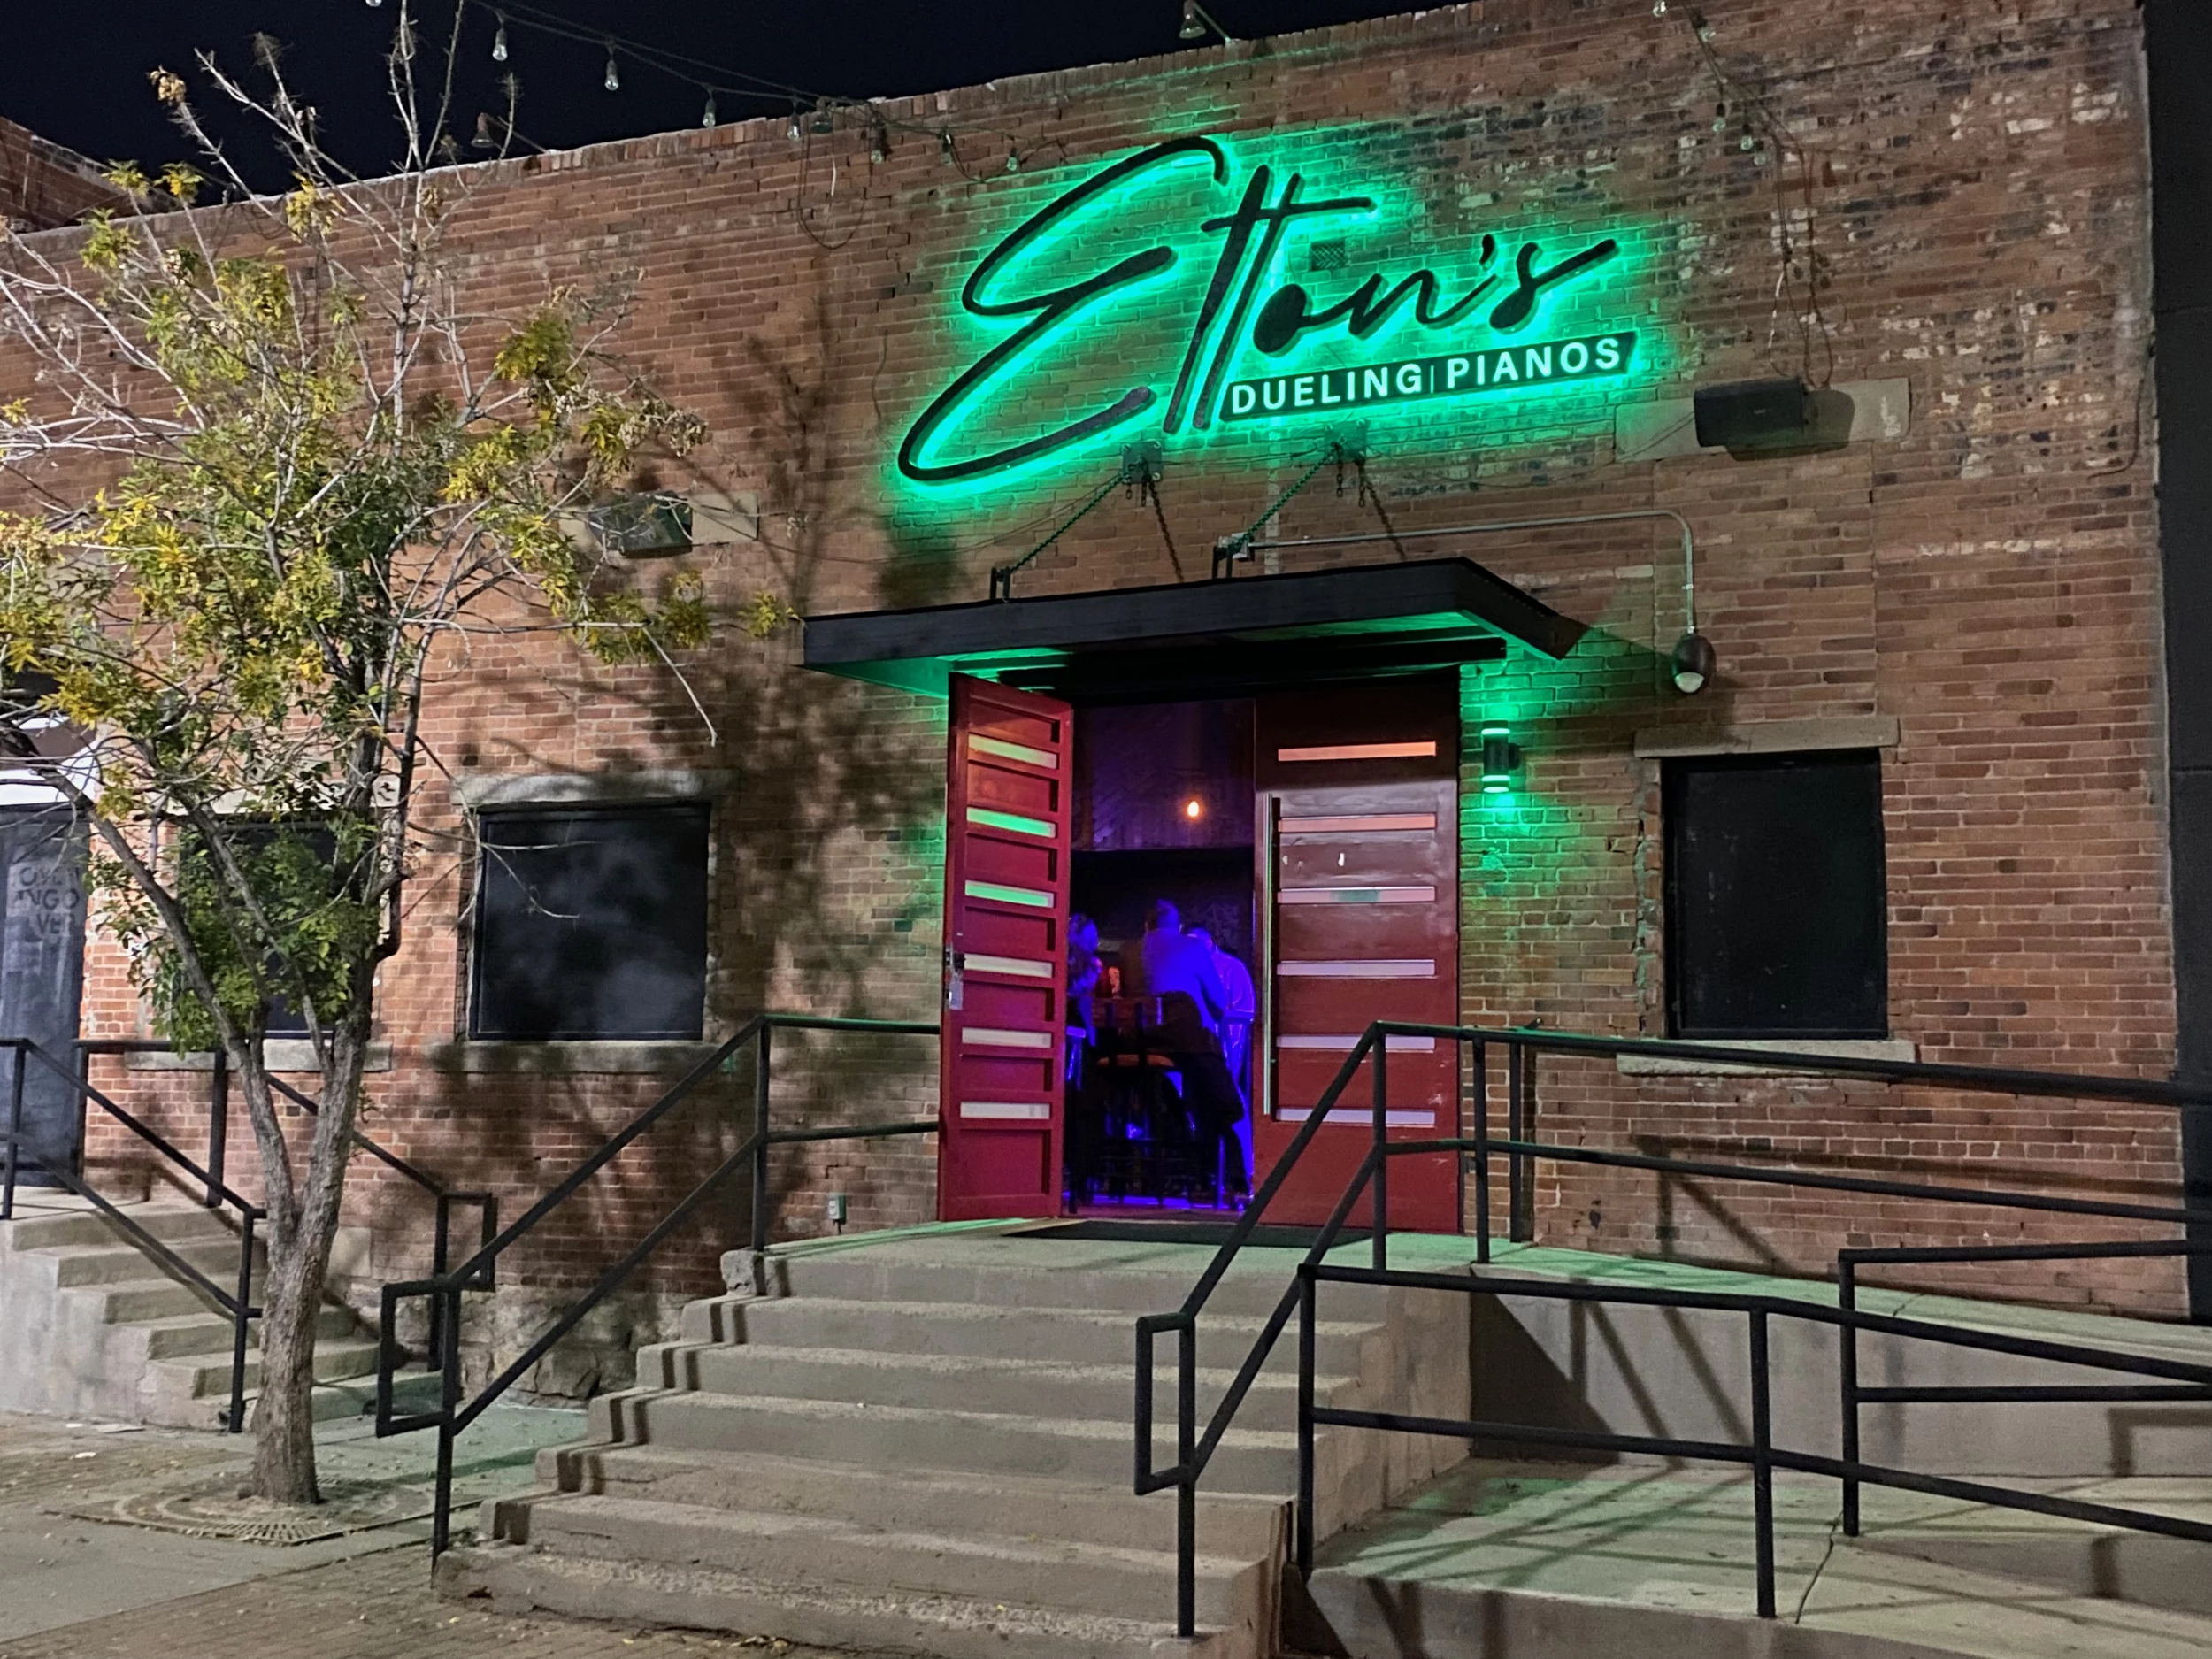 El Paso's Union Plaza Welcomes First-Ever Dueling Piano Bar